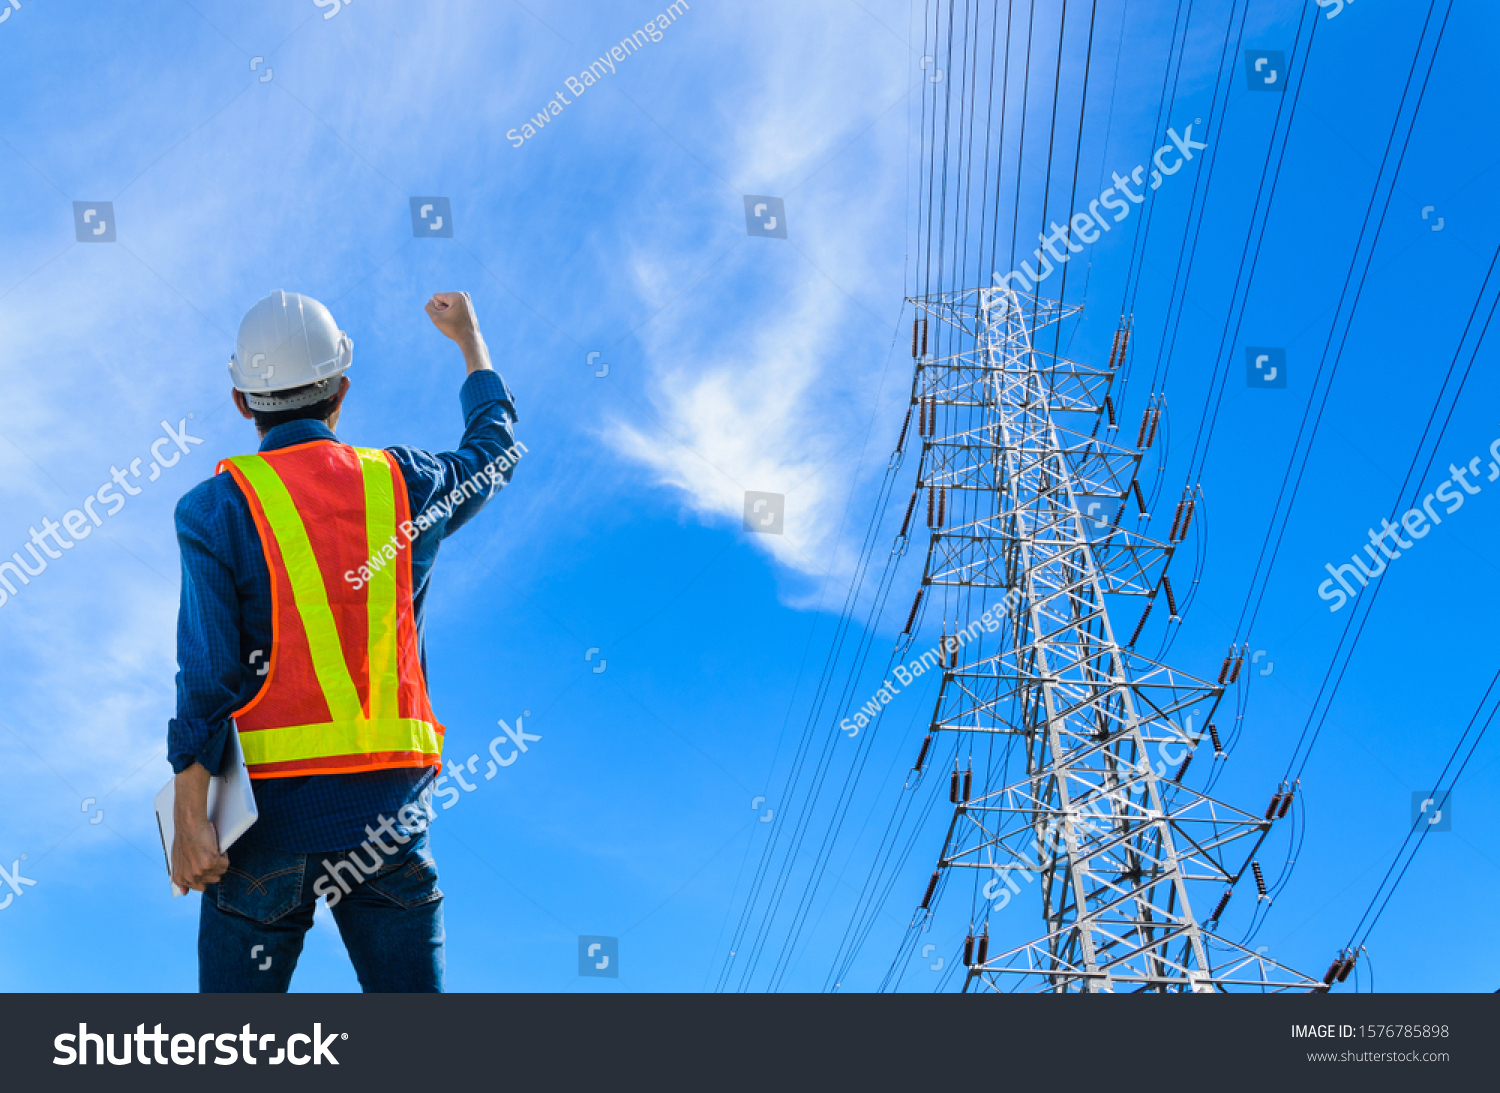 Successful engineers stand against high voltage poles on a blue background. #1576785898